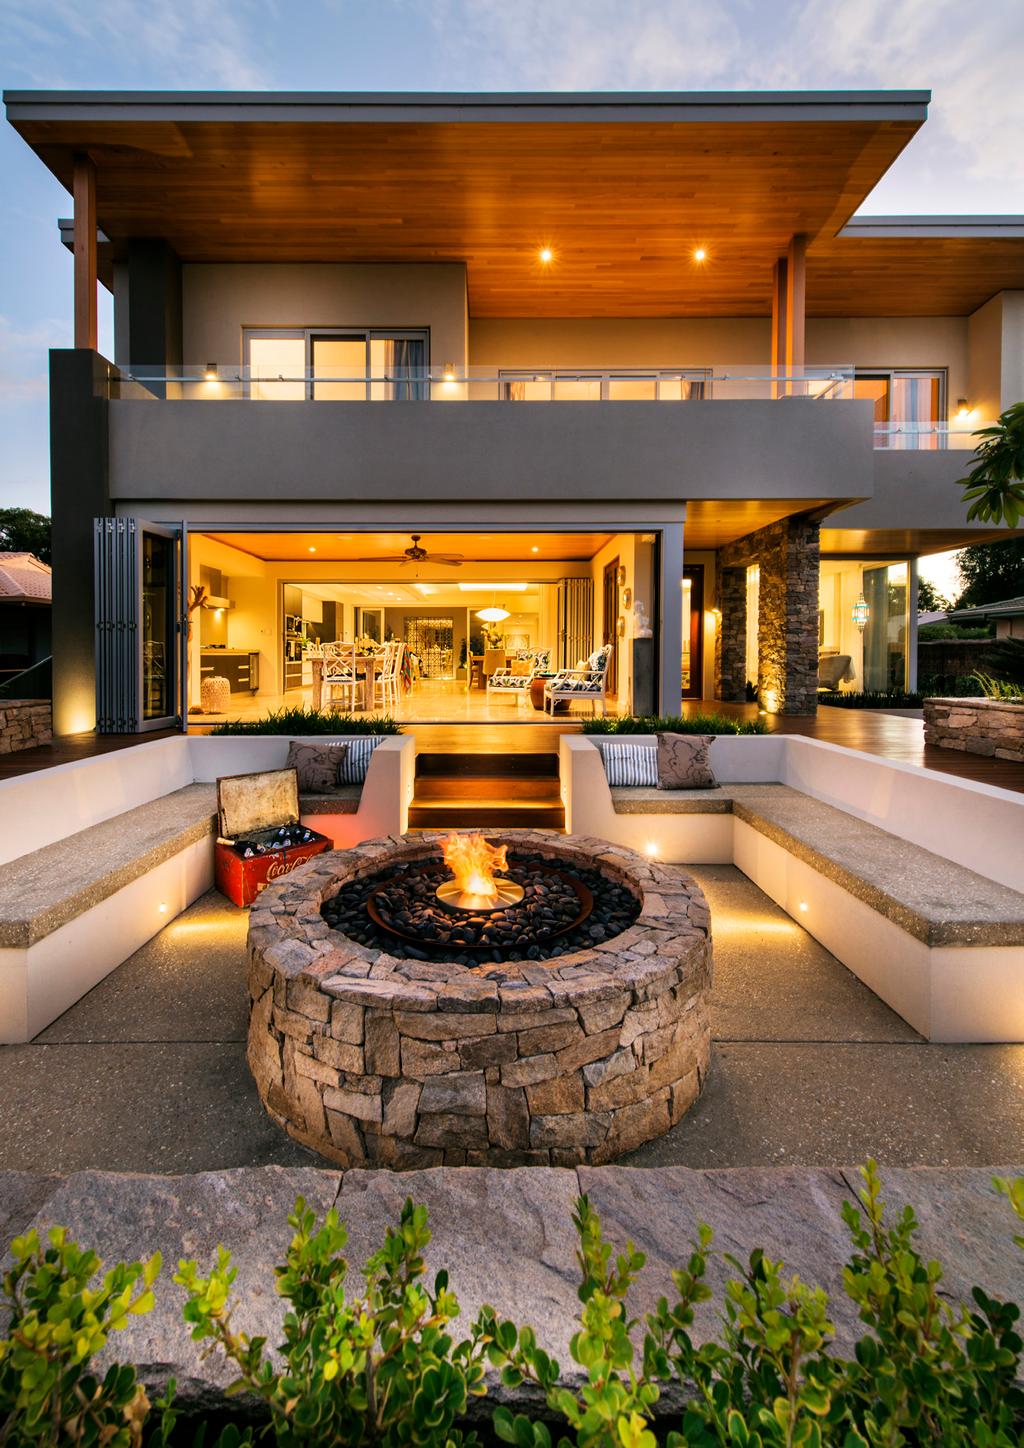 OUTDOOR HEATING A firepit or stone stove can save you